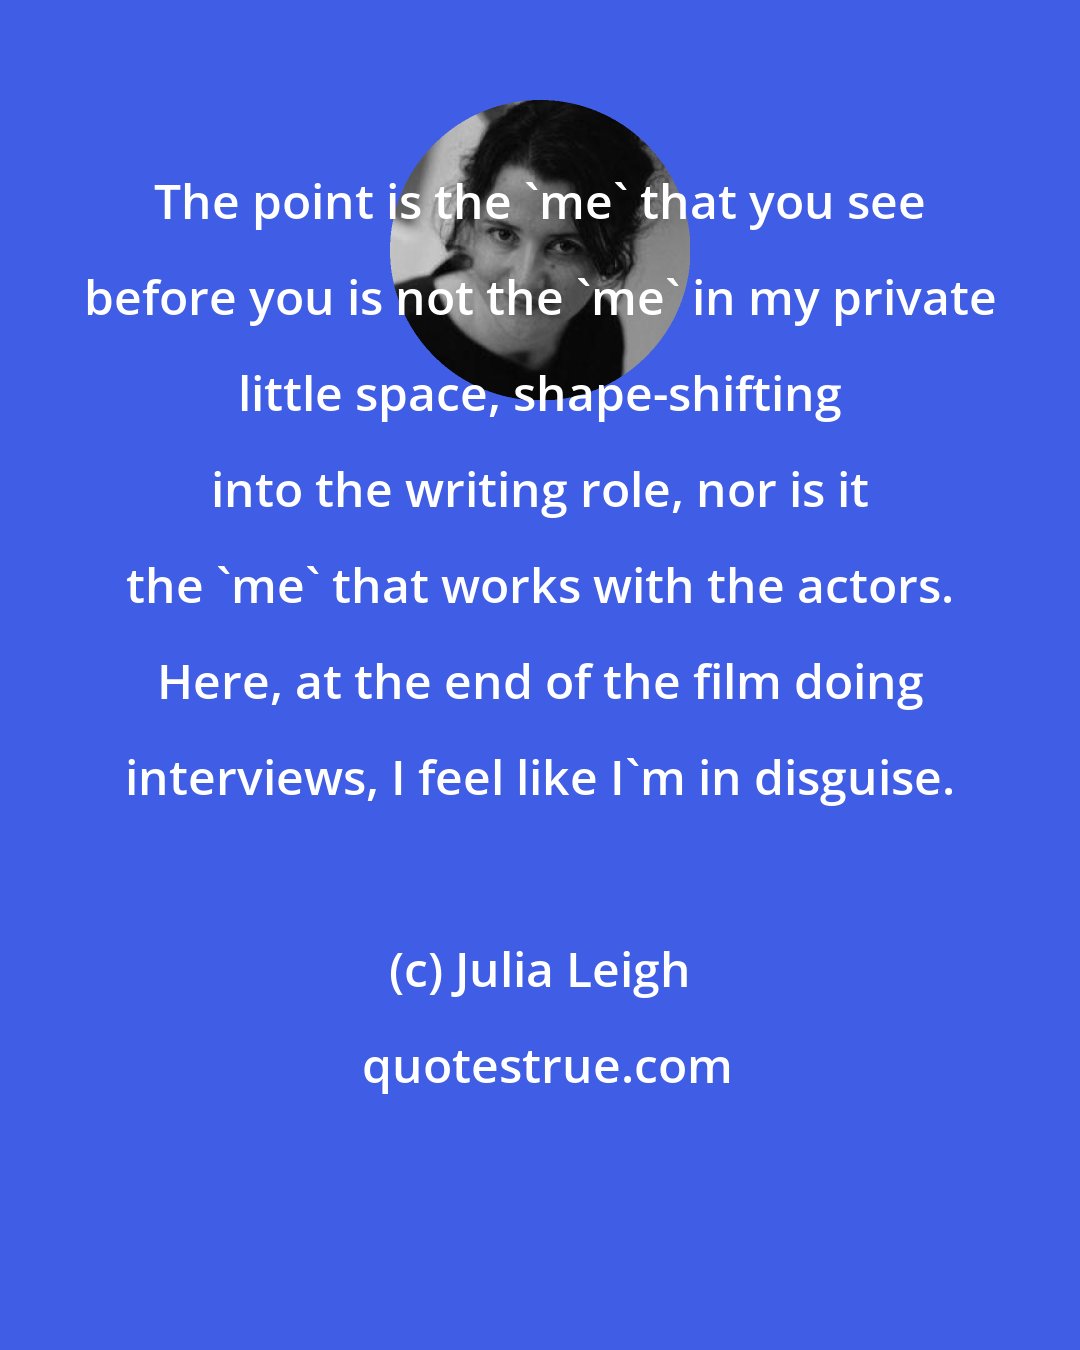 Julia Leigh: The point is the 'me' that you see before you is not the 'me' in my private little space, shape-shifting into the writing role, nor is it the 'me' that works with the actors. Here, at the end of the film doing interviews, I feel like I'm in disguise.